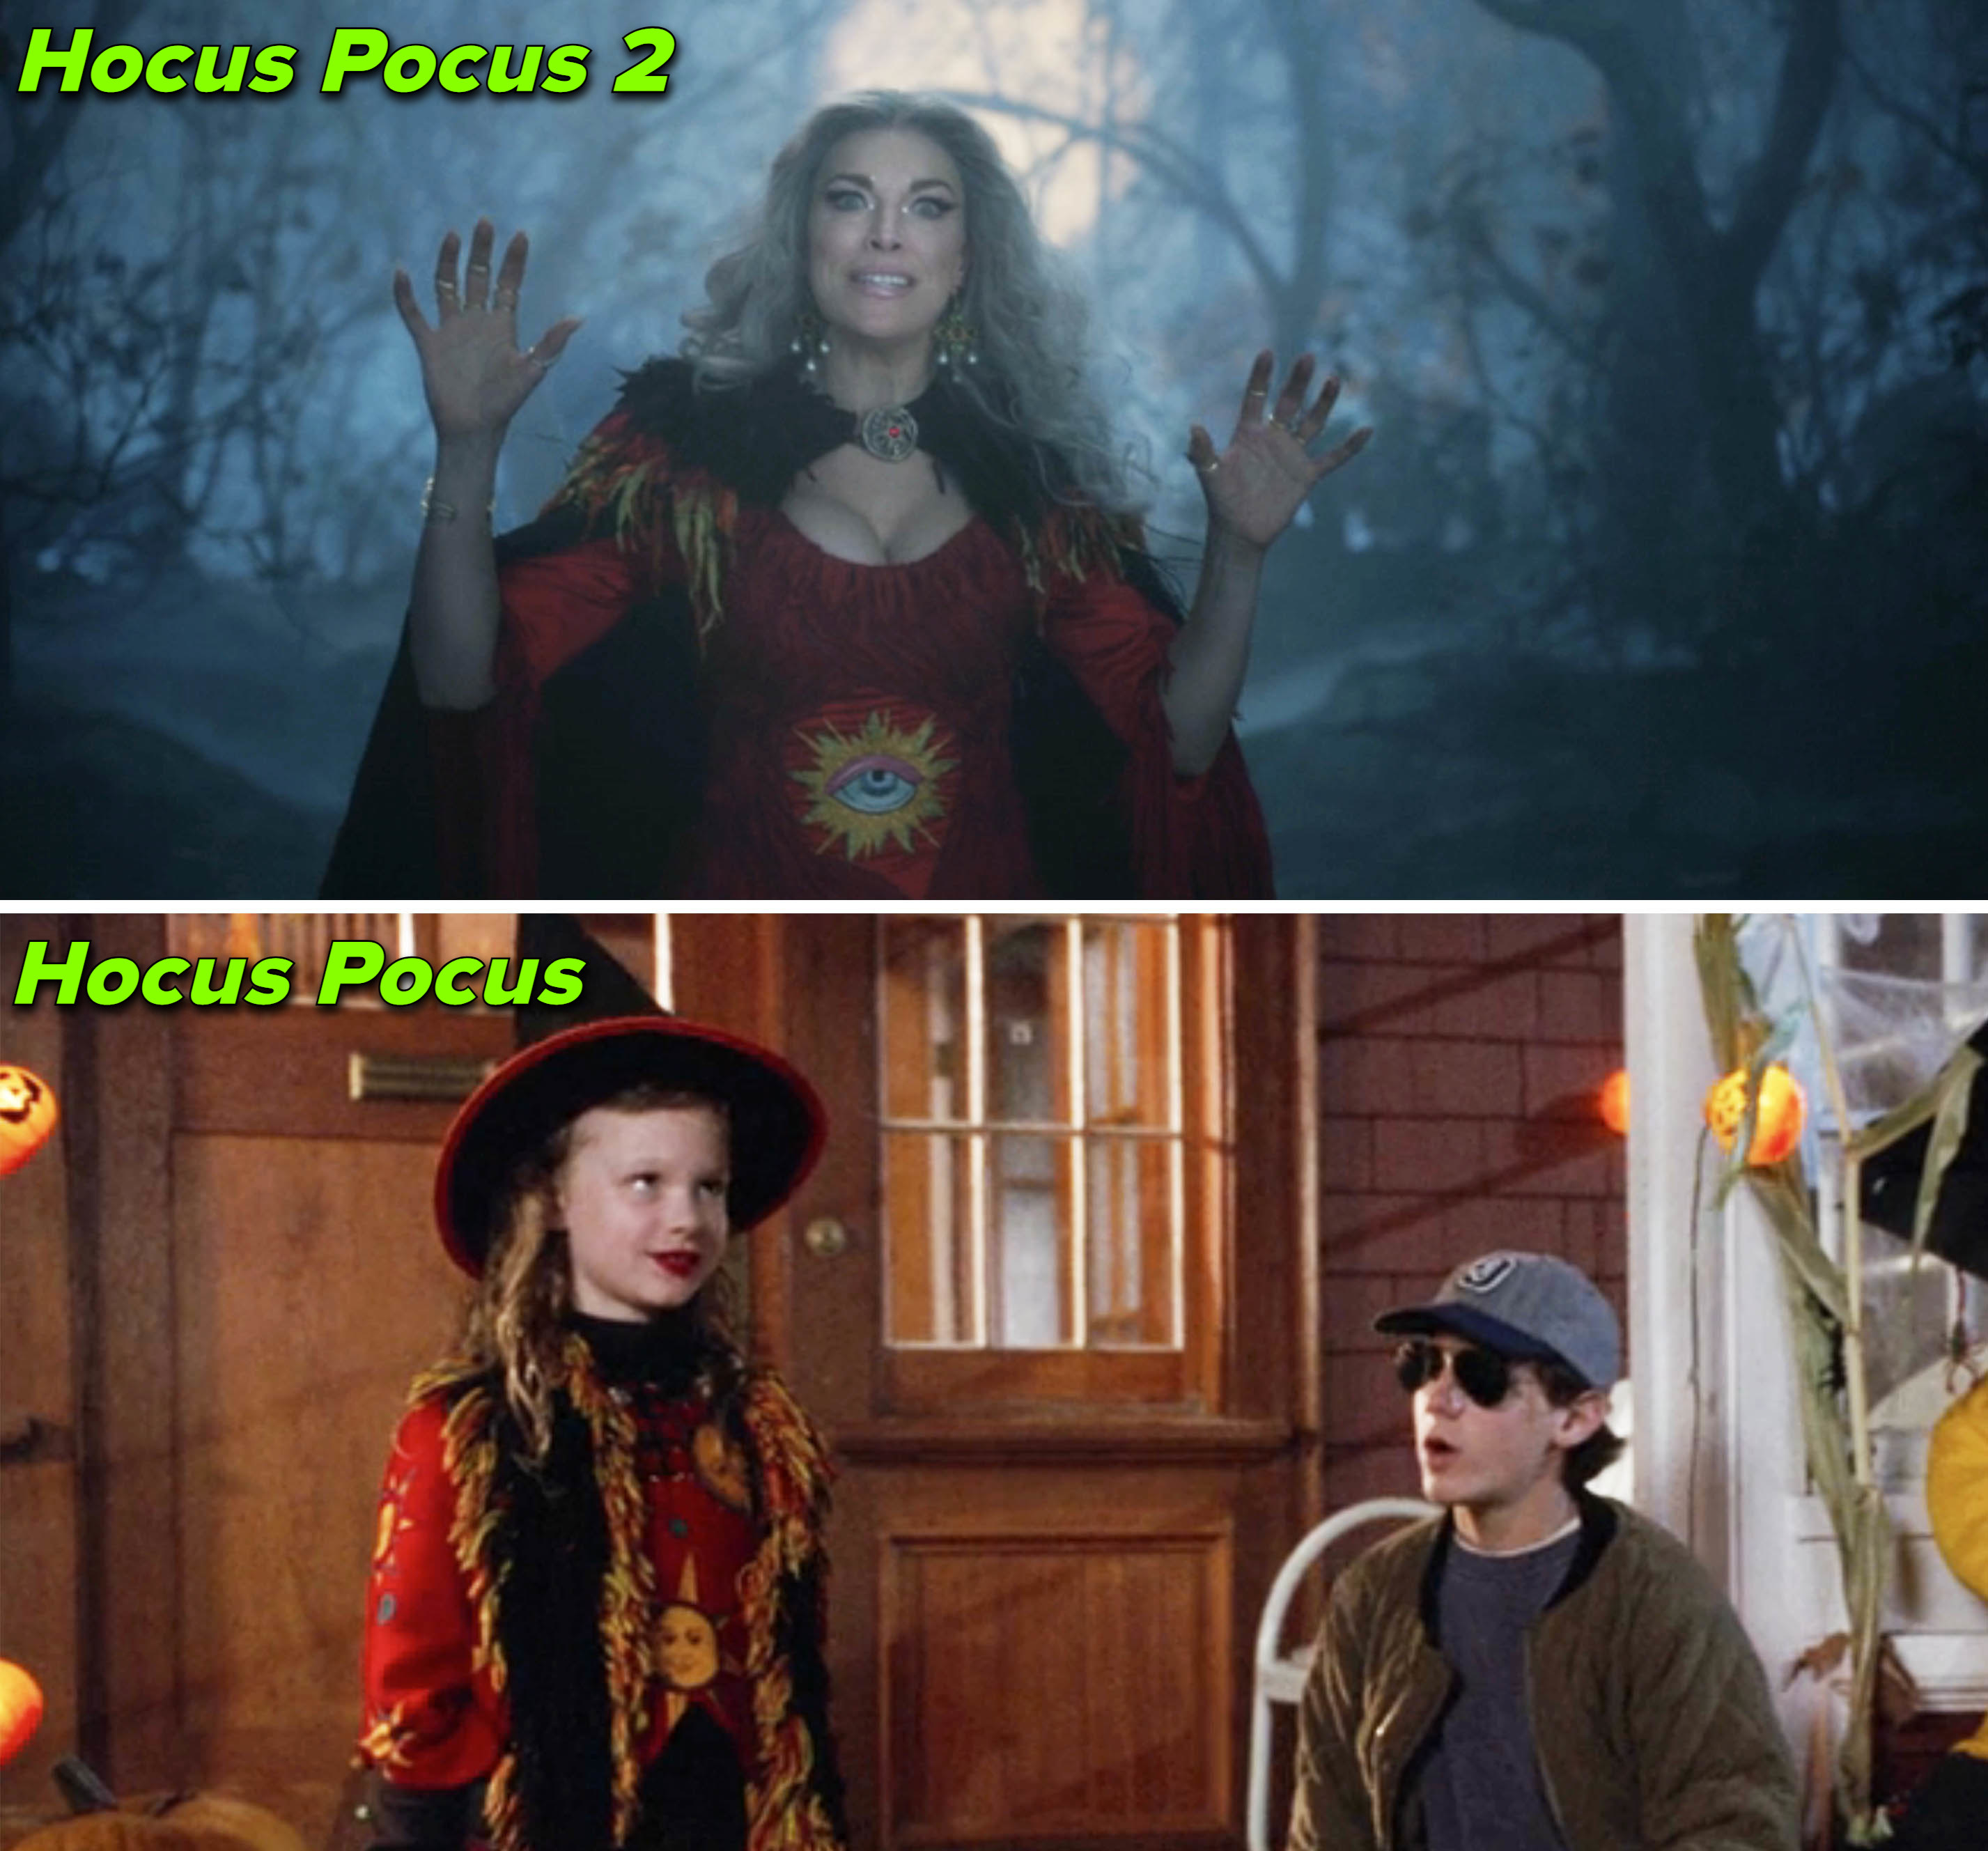 Both outfits include a high witch hat and a red-and-black costume